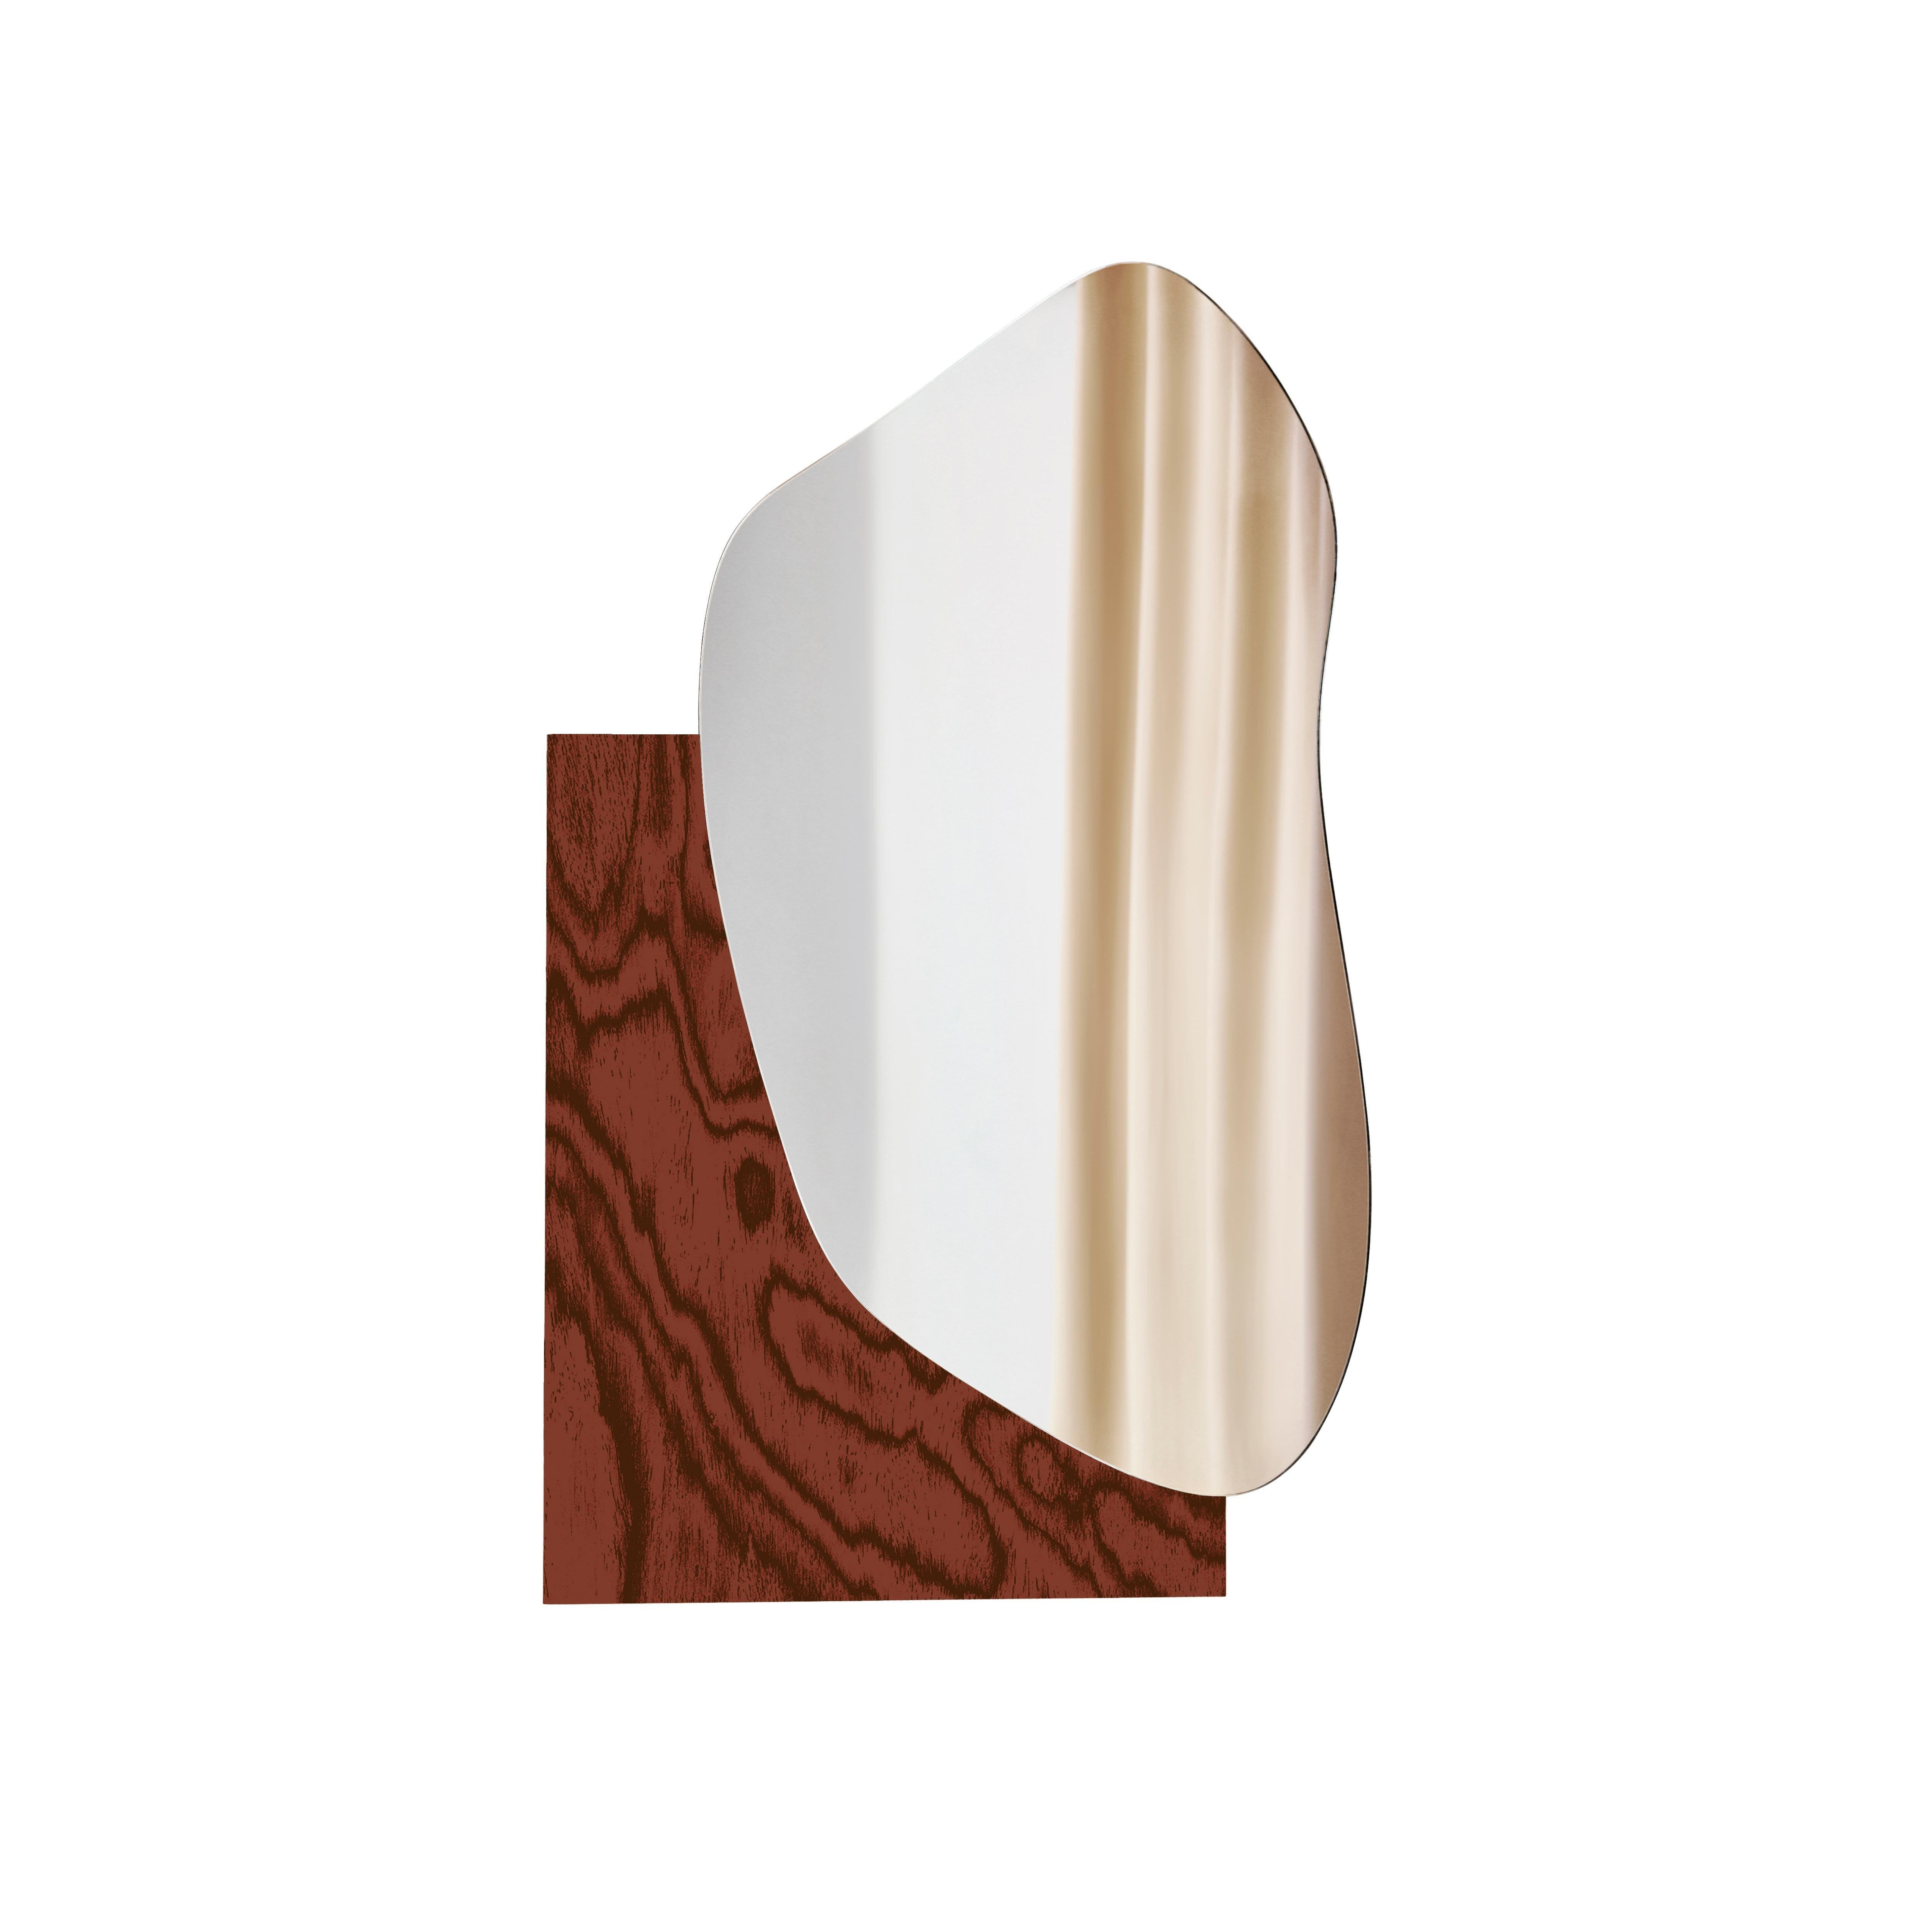 Organic Modern Contemporary Wall Mirror Lake 1 by Noom, Ettore Sottsass ALPI Wood For Sale